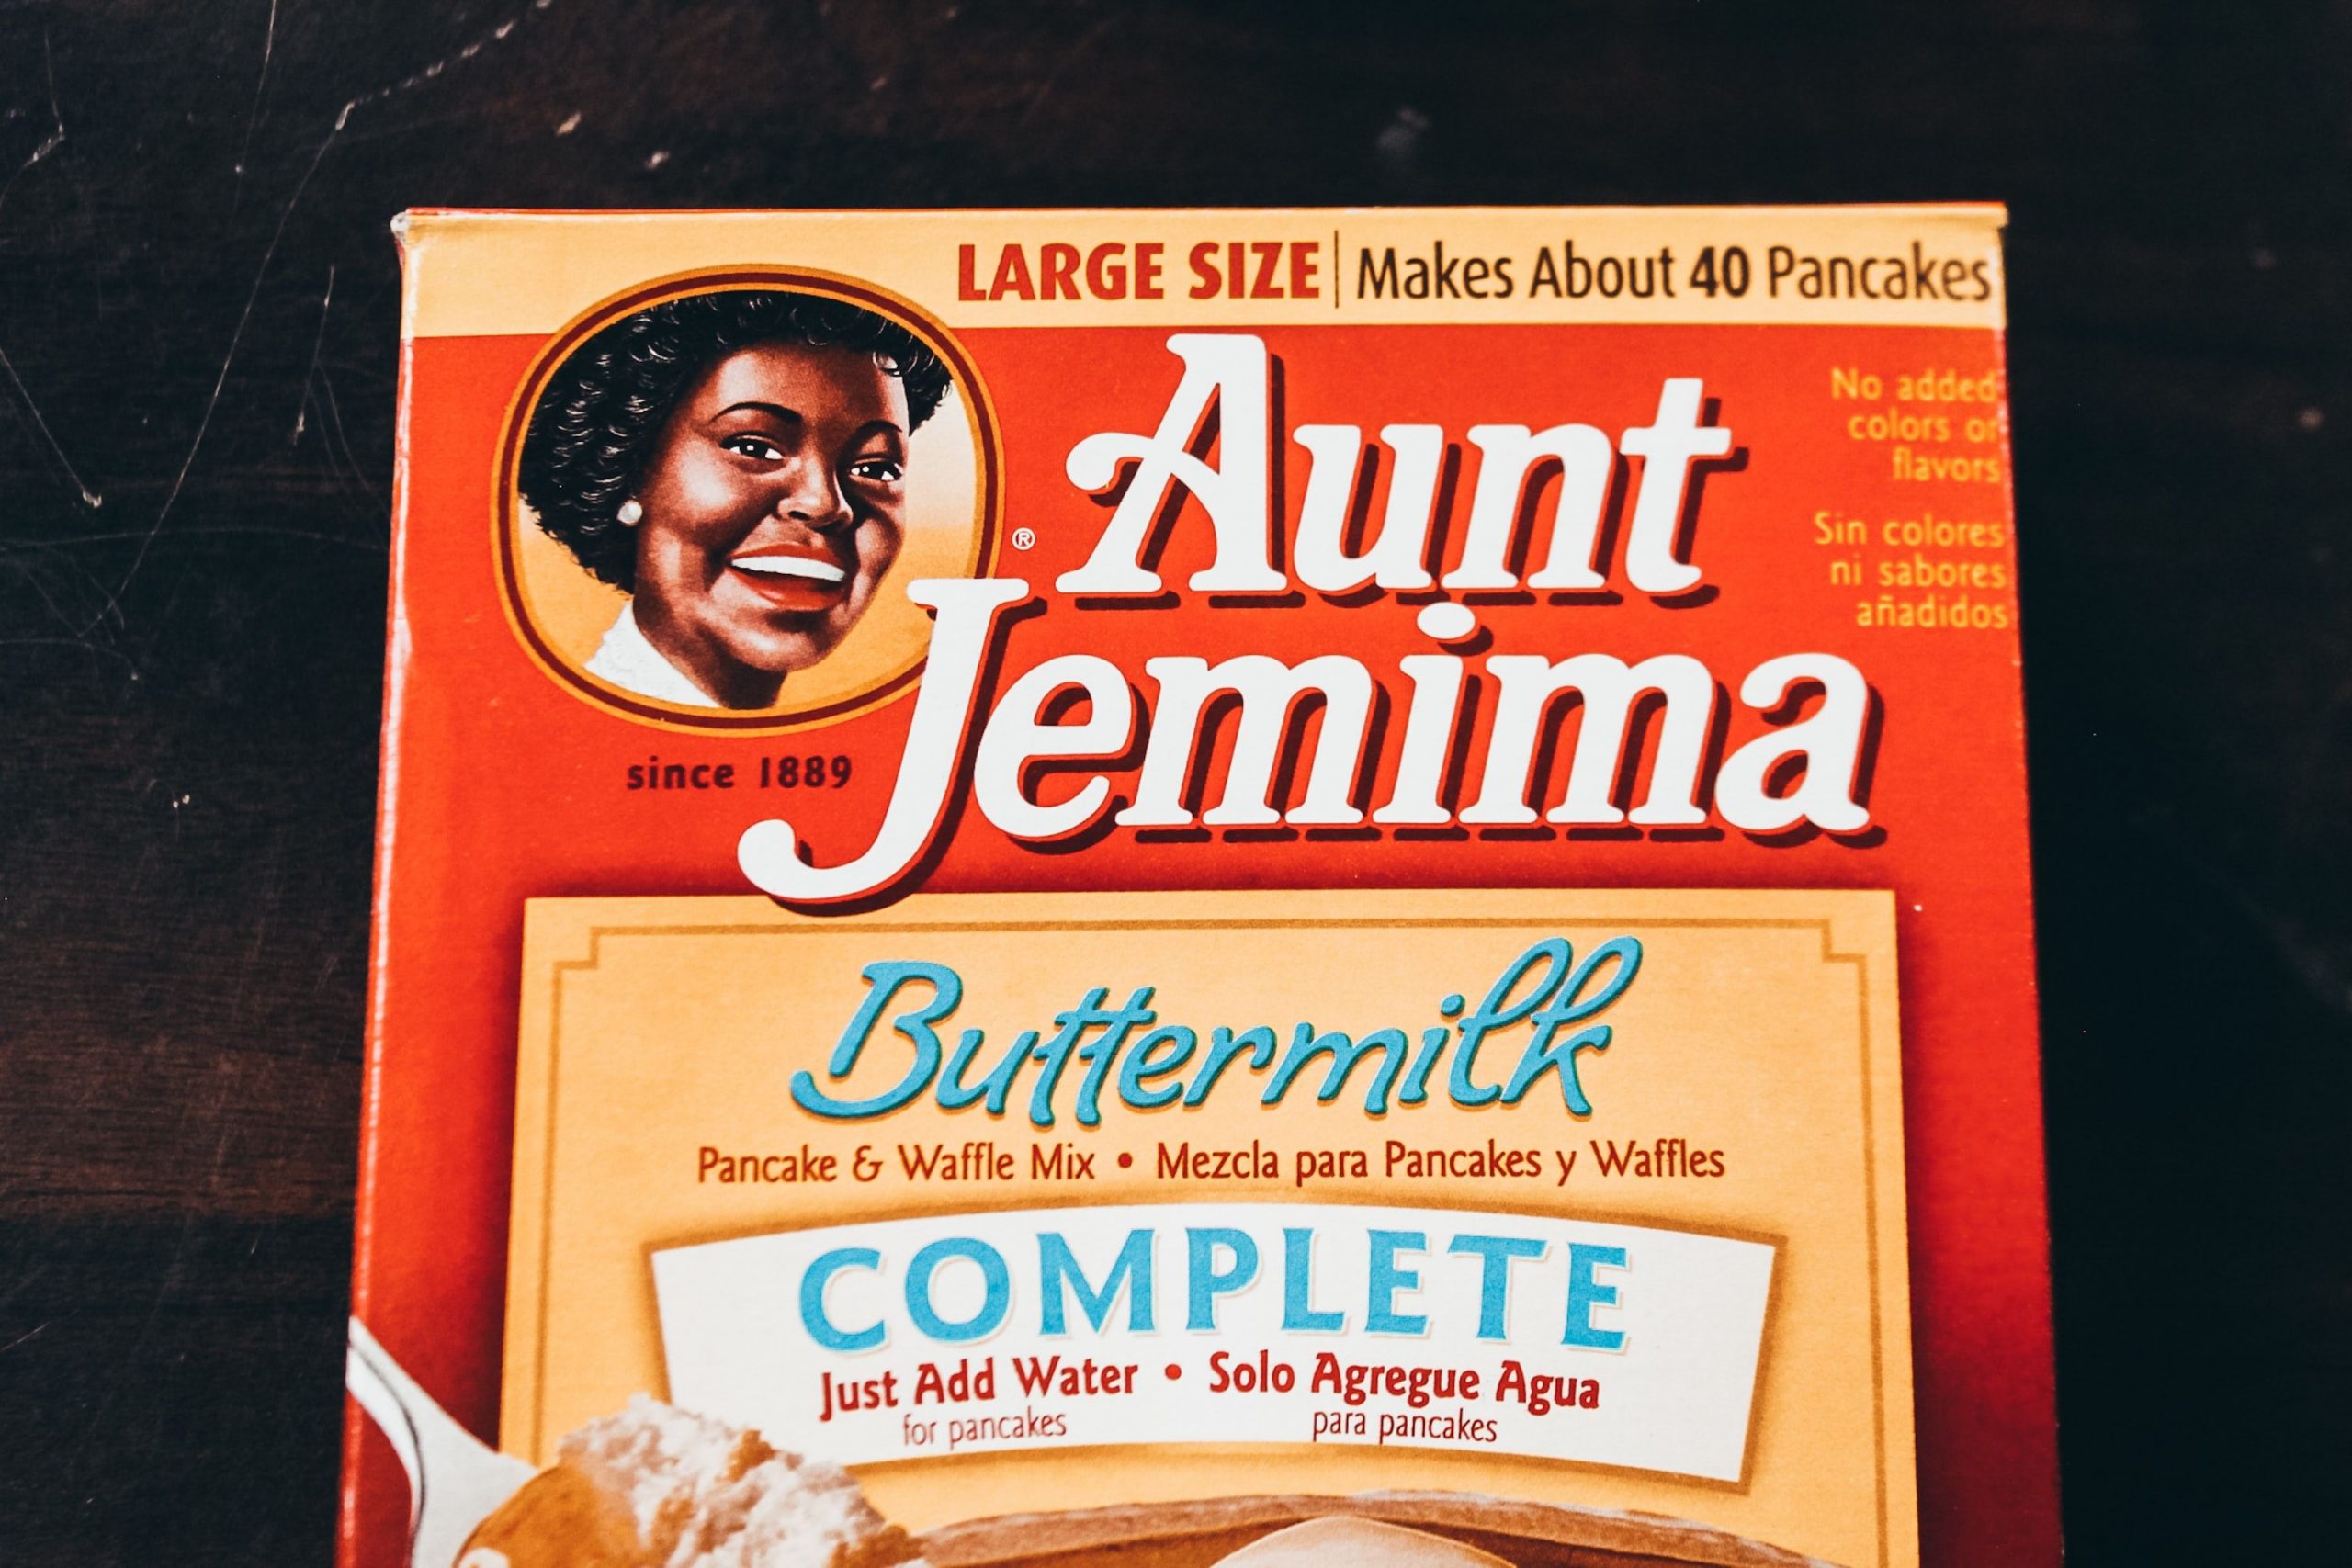 Shedding racial stereotype, ‘Aunt Jemima’ pancake mix gets new name